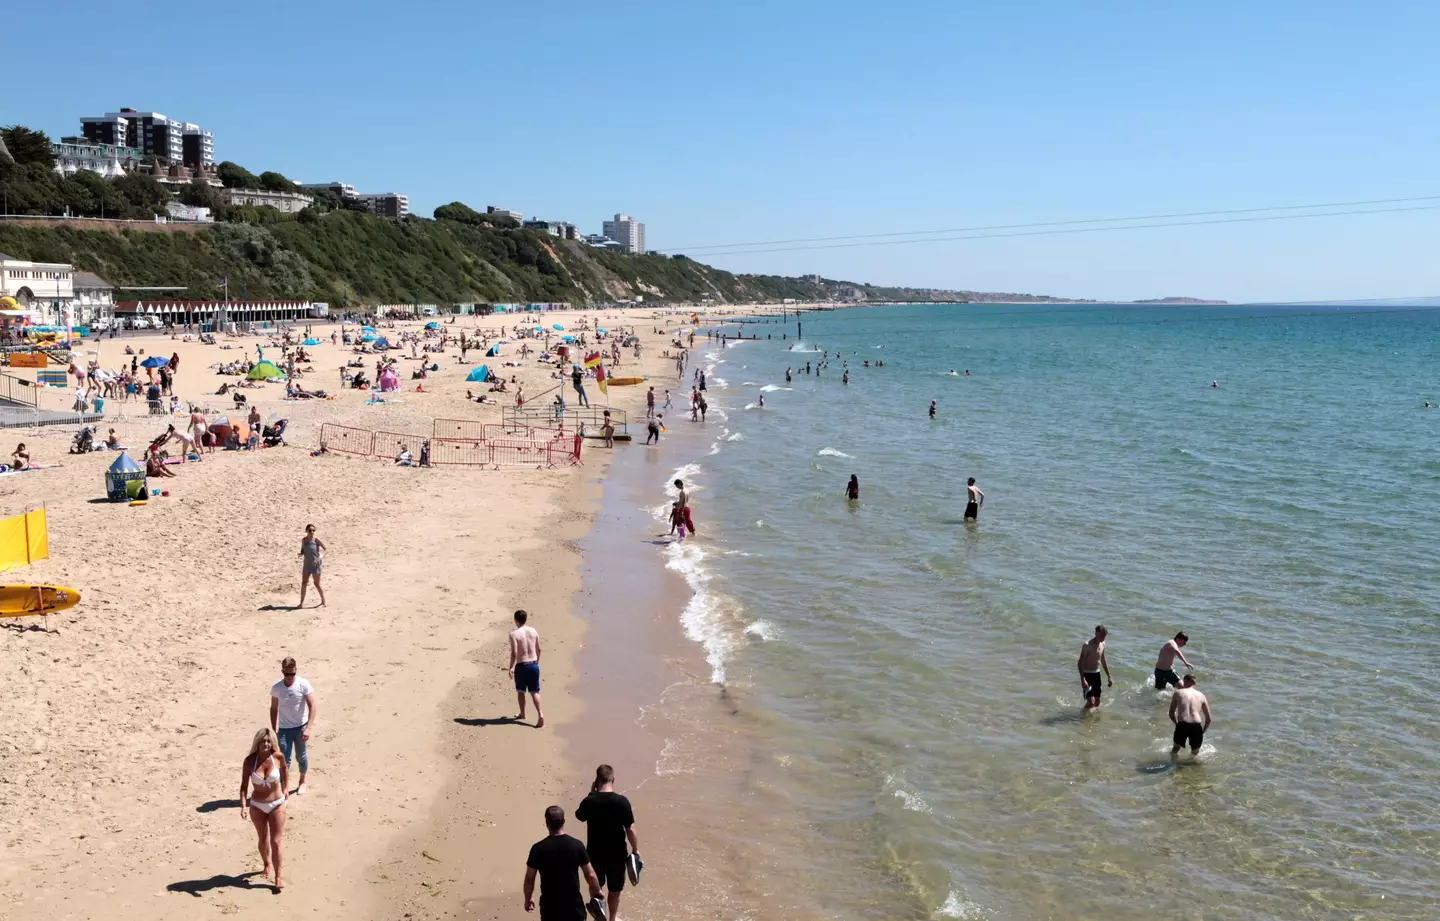 People will be flocking to Britain's beaches in all this heat.